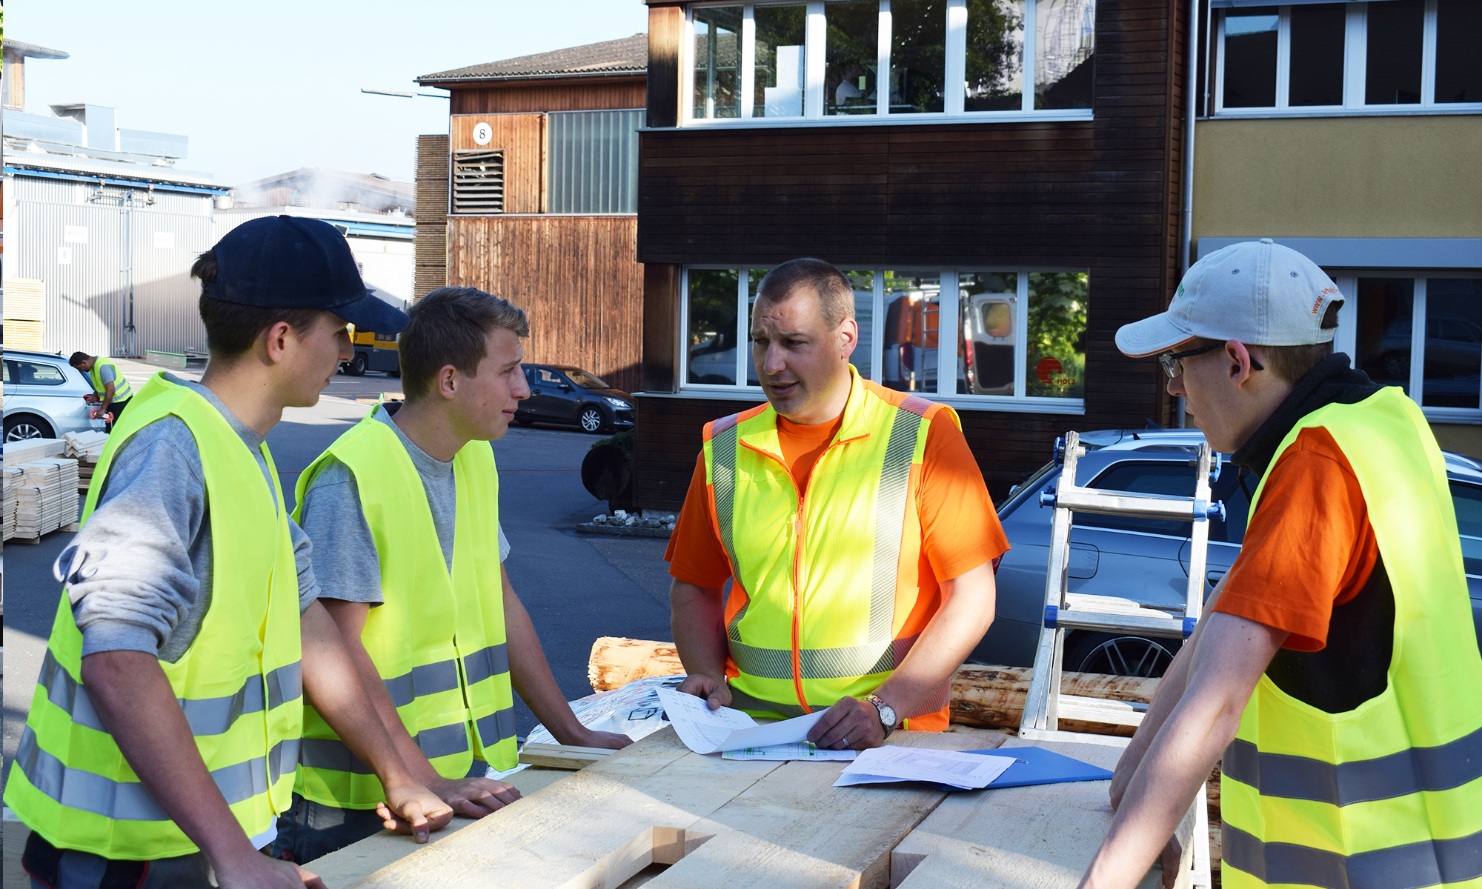 Group of apprentices discussing the work with their supervisor